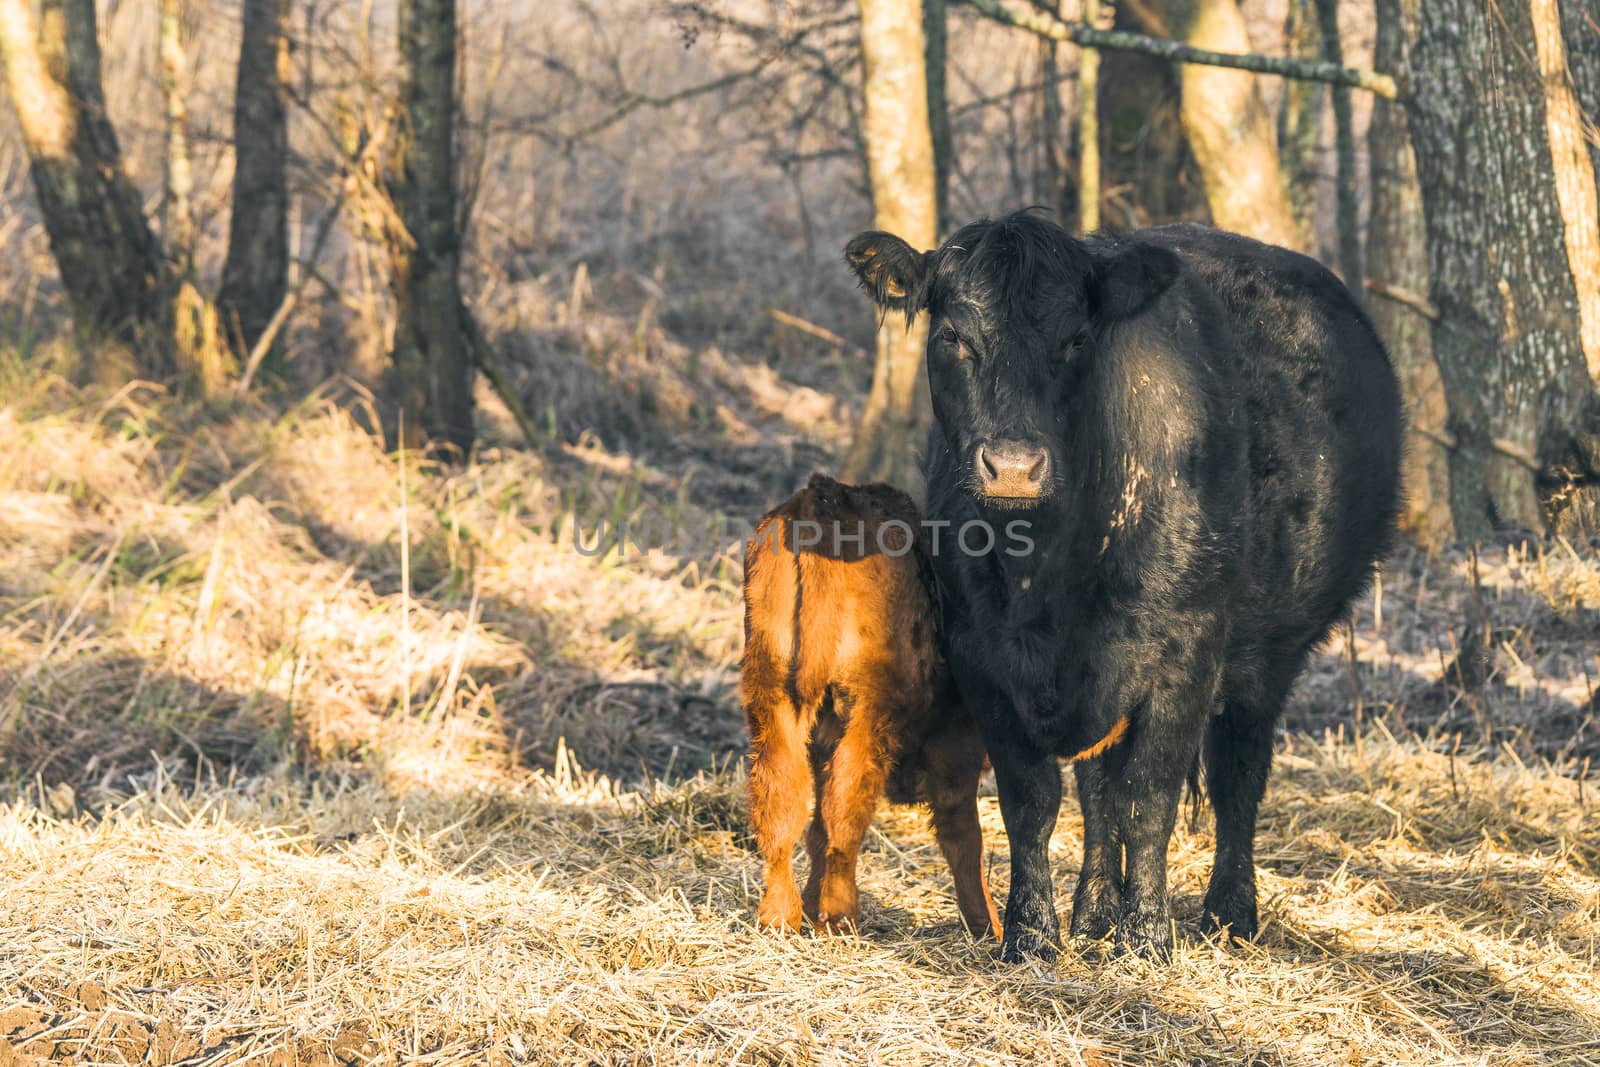 Calf with the mother cow near a forest by Sportactive